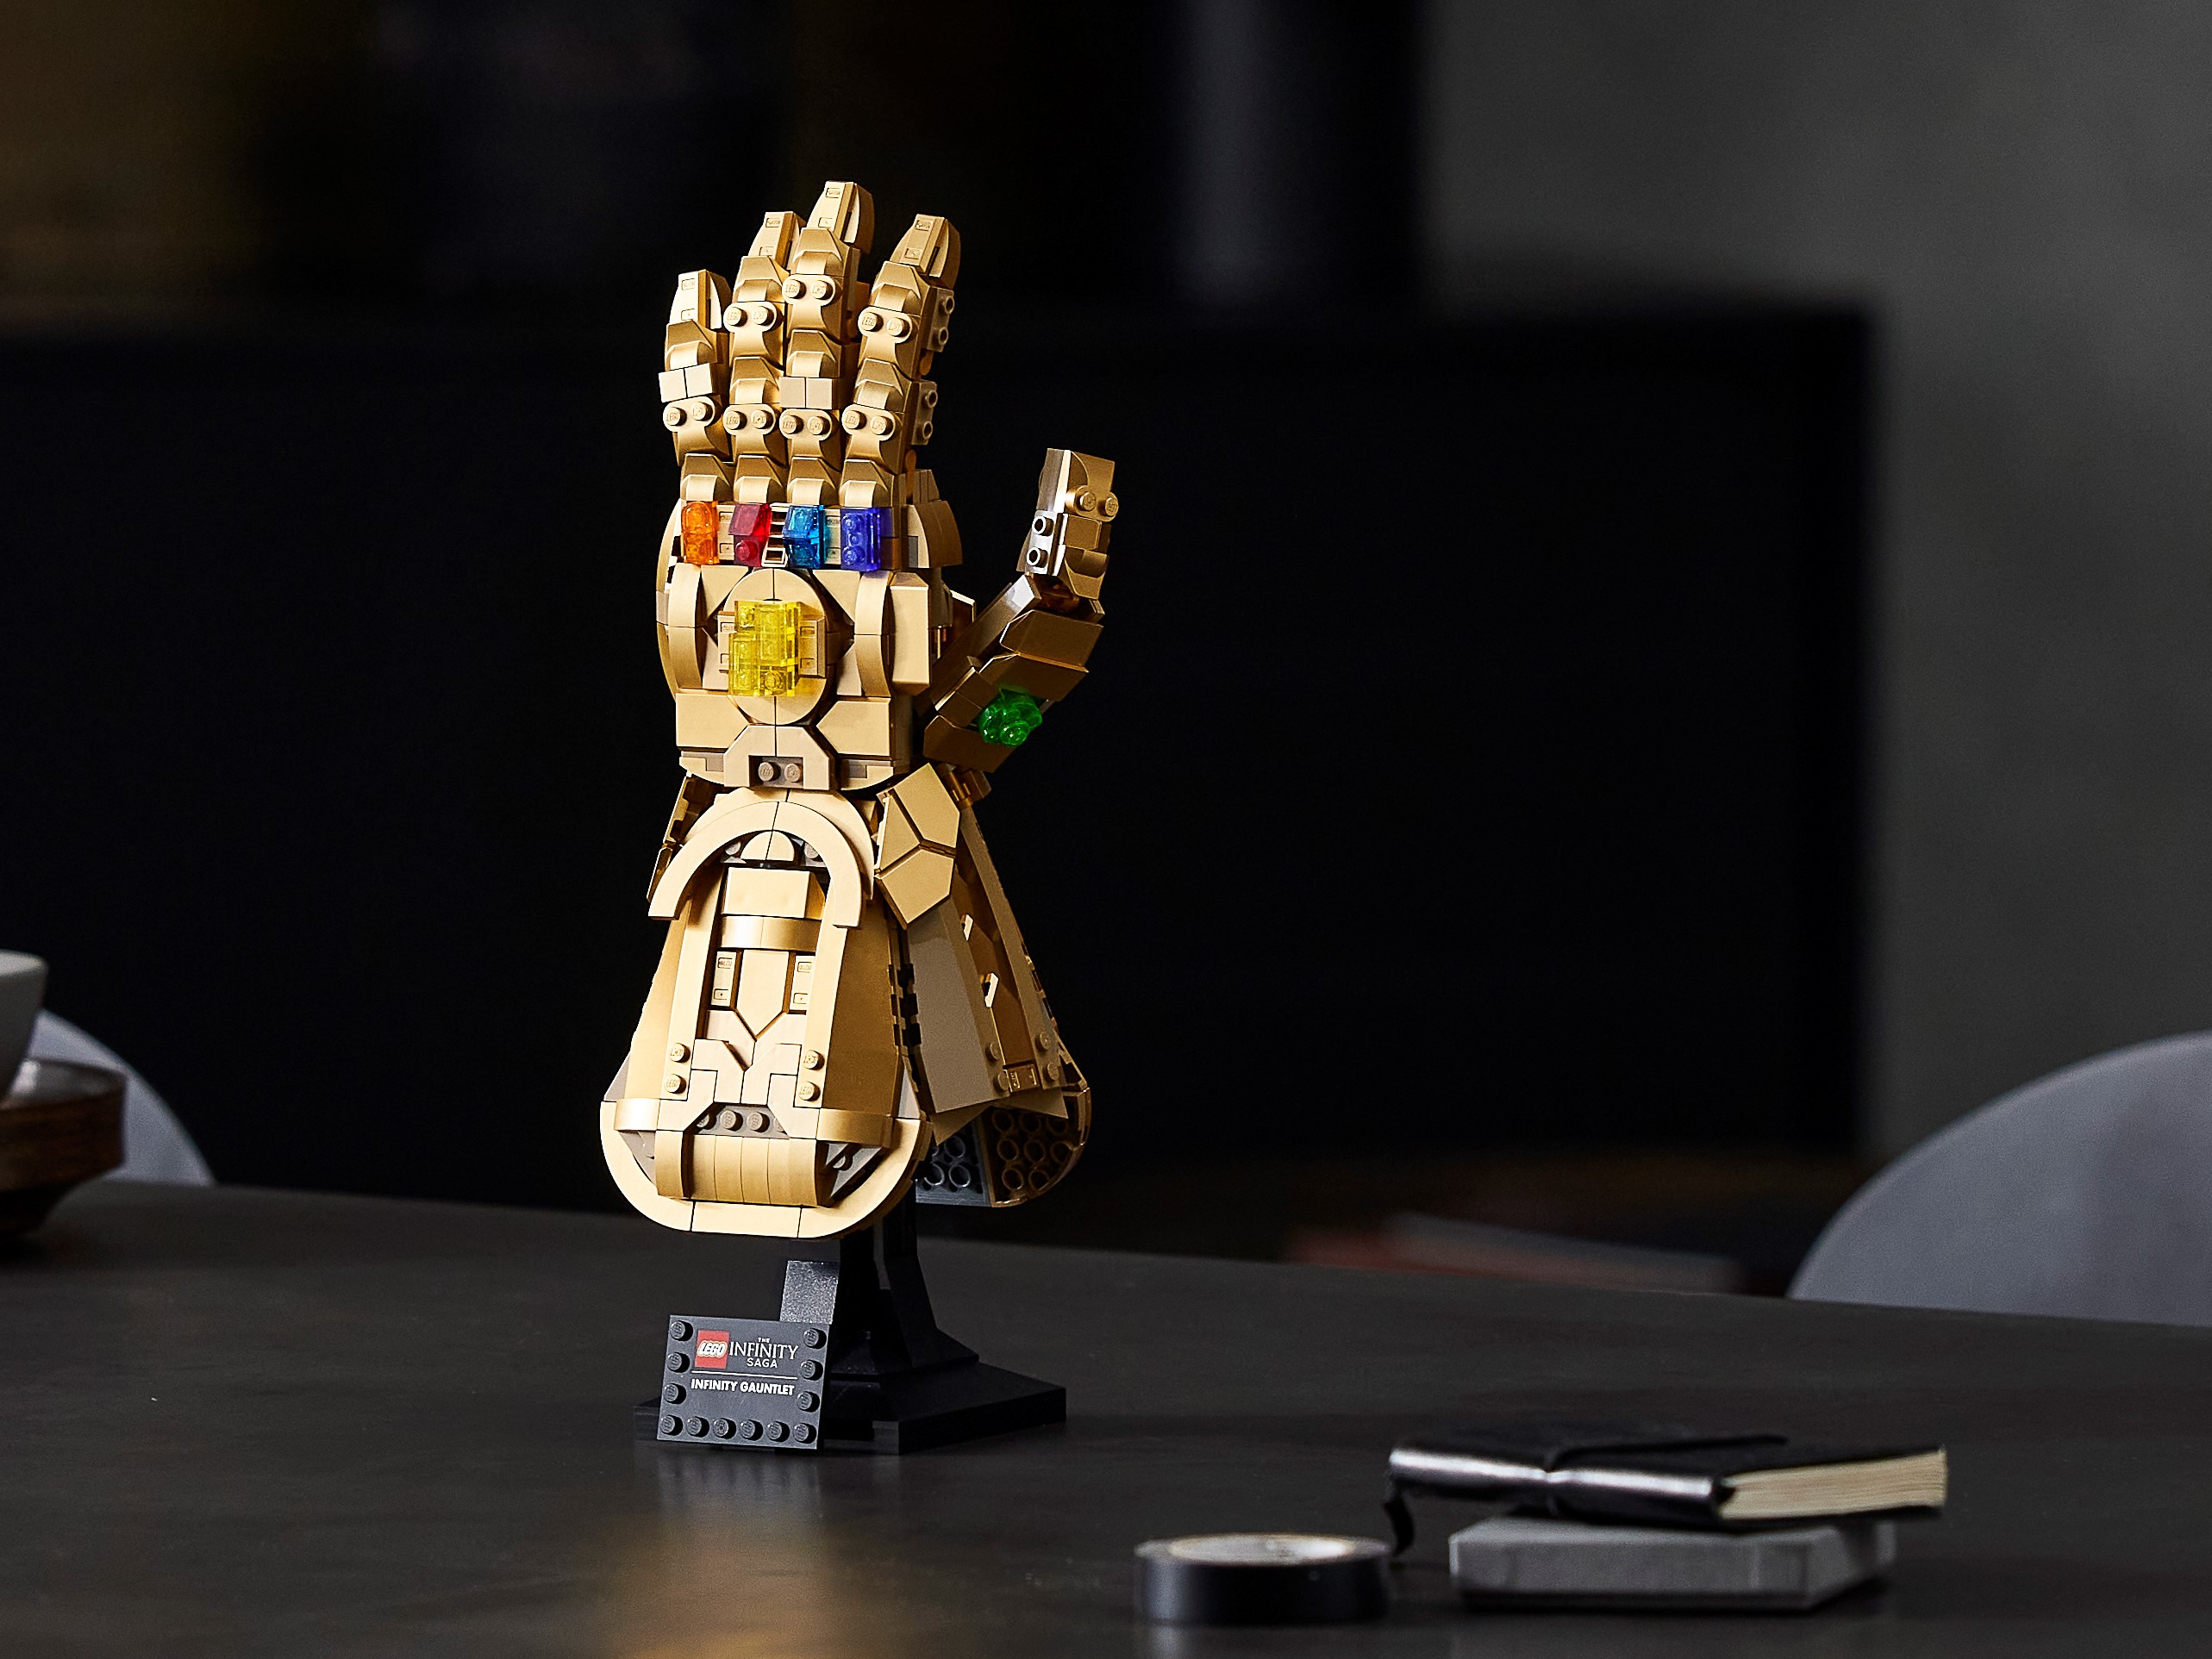 Infinity Gauntlet 76191 | Marvel | Buy online at the Official LEGO® Shop US